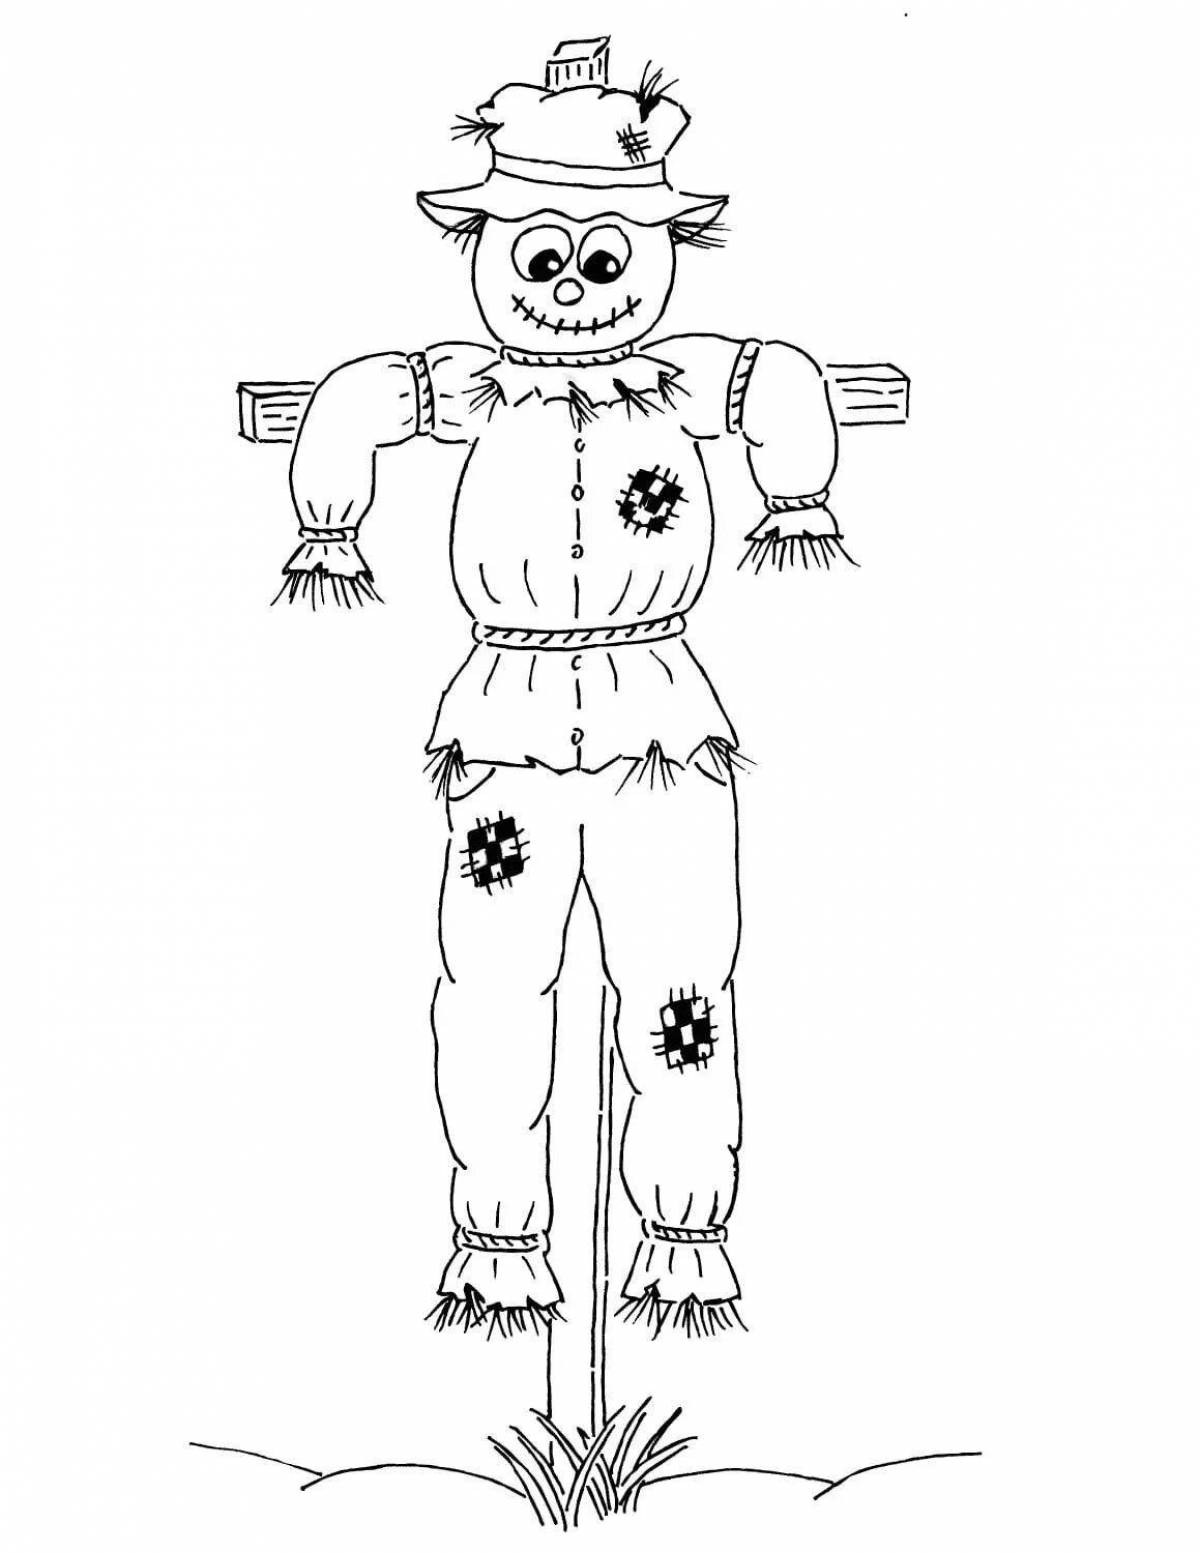 Colorful scarecrow coloring page